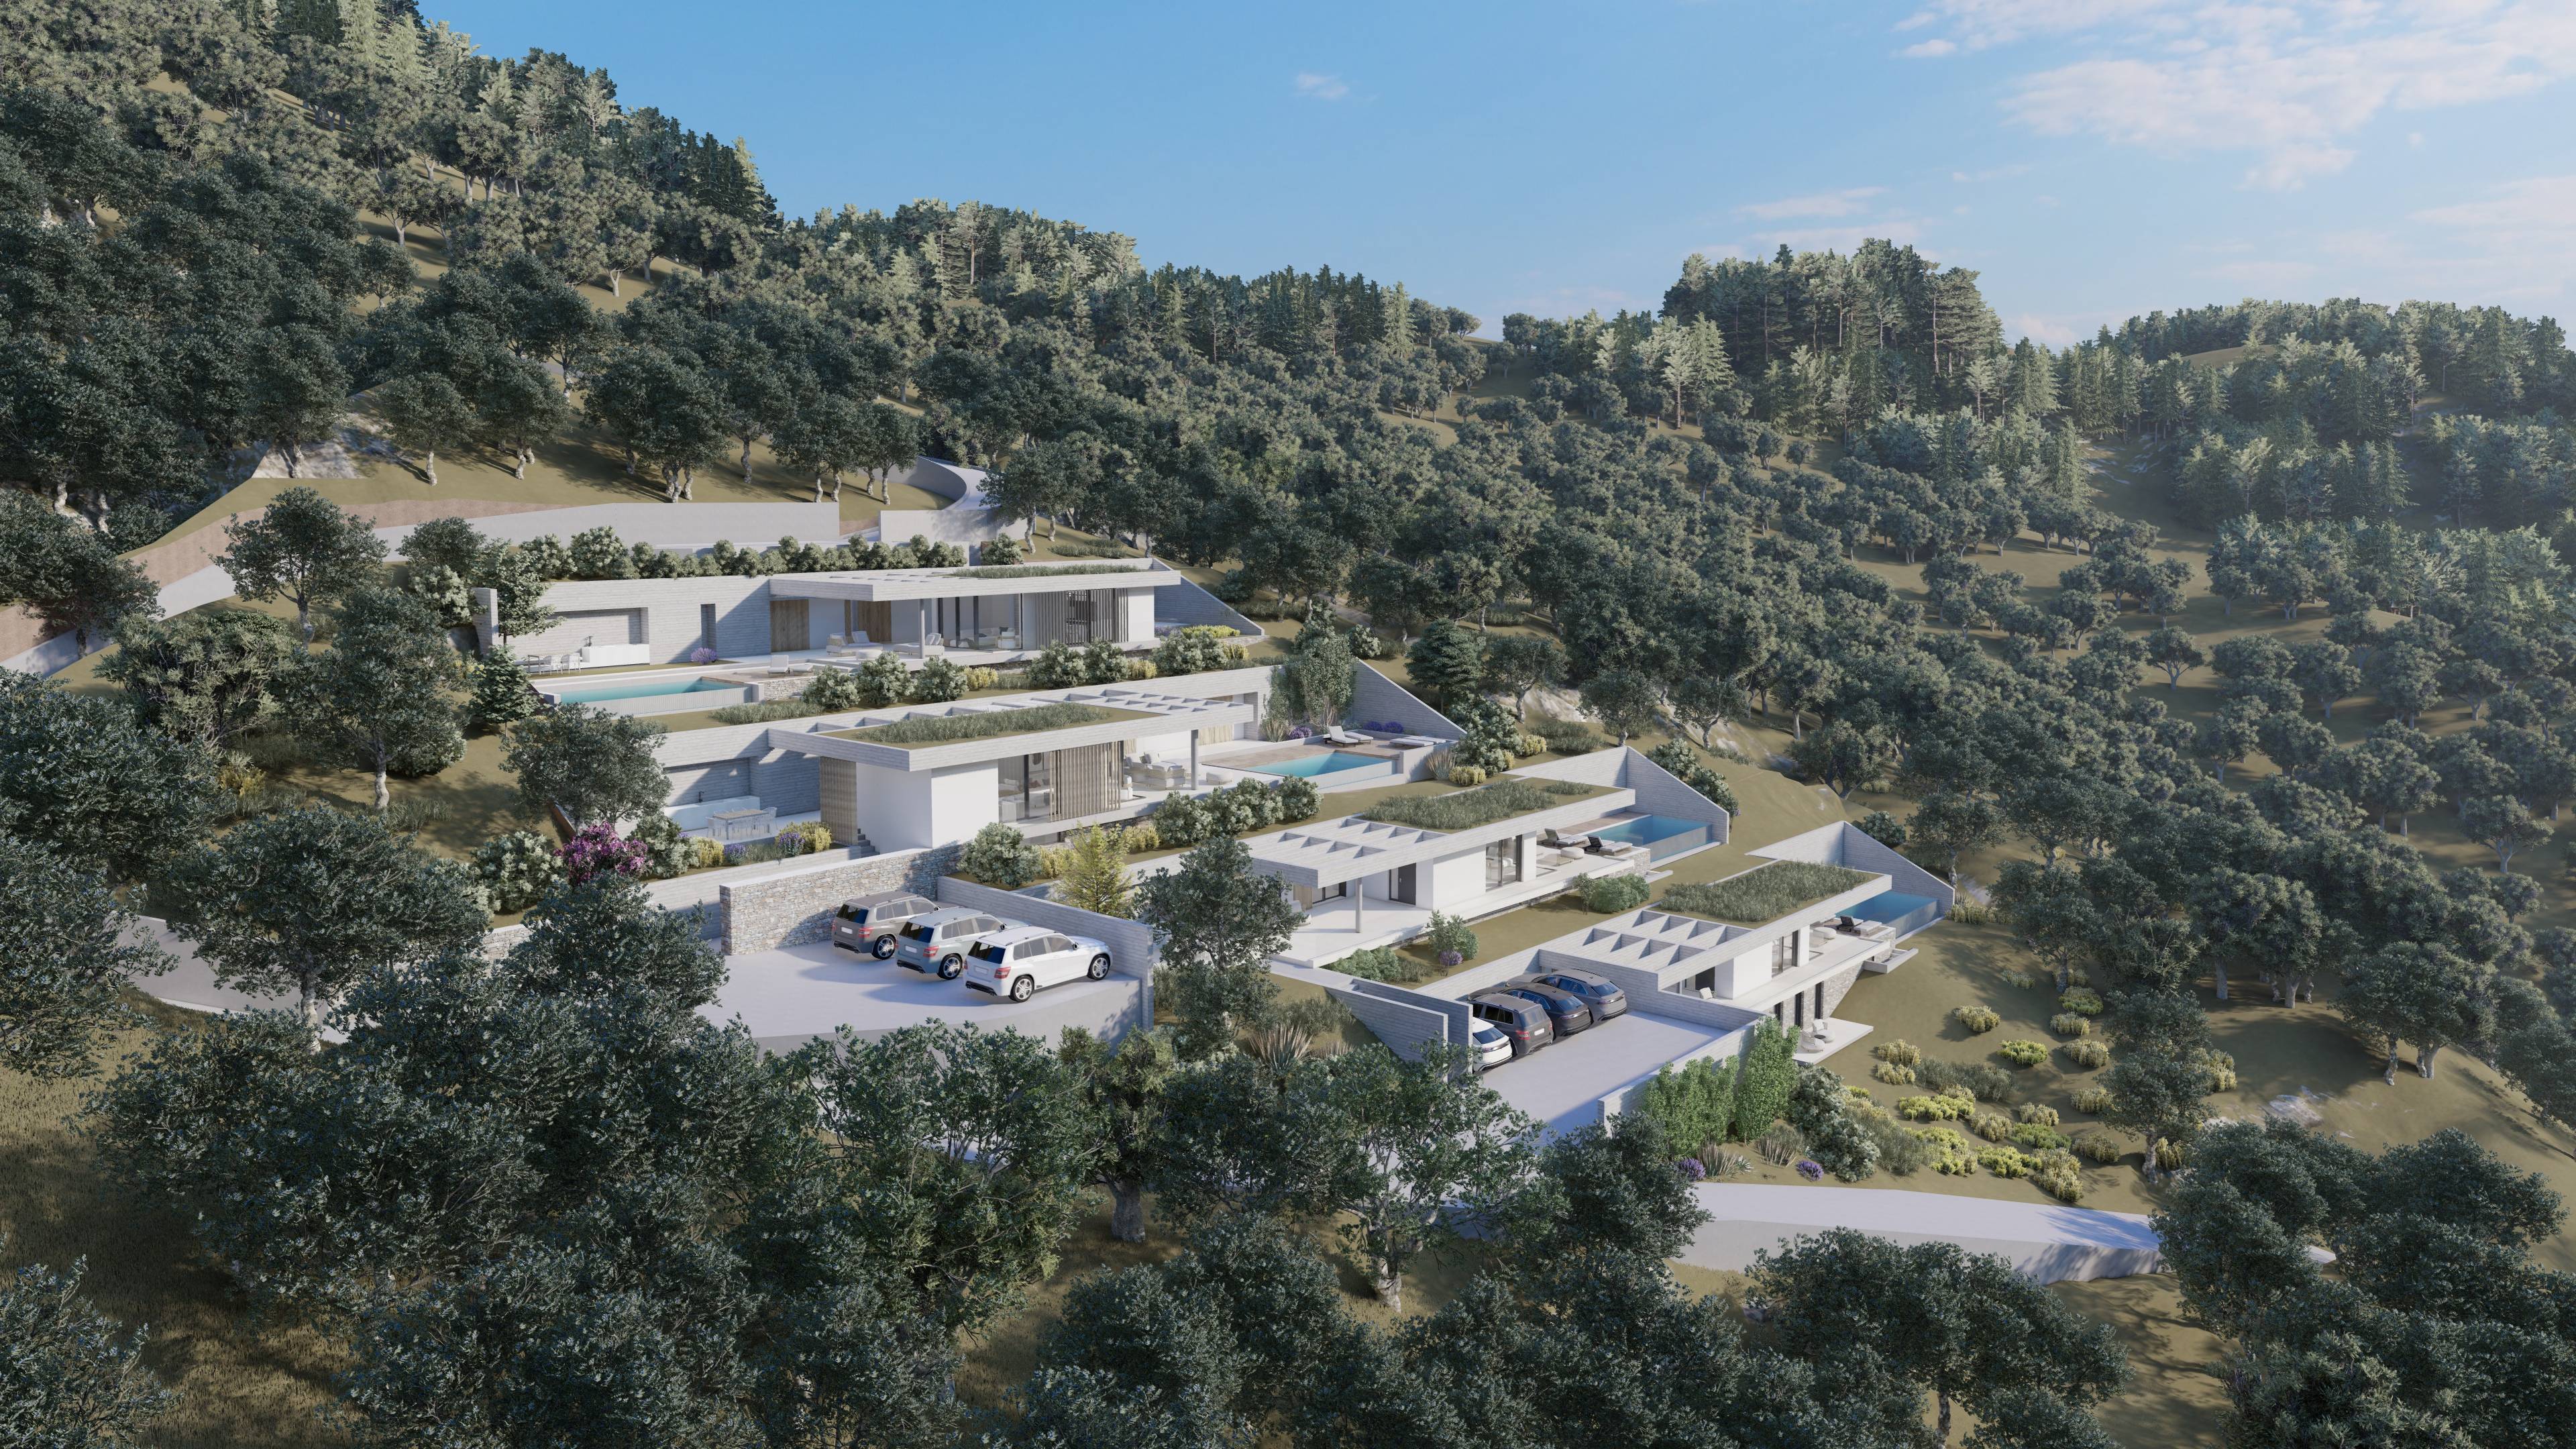 LUXURY MAGIC FOREST RETREAT VILLA VII AMID SKIATHOS’ PRESERVED OLIVE GROVES: PRIME INVESTMENT OPPORTUNITY